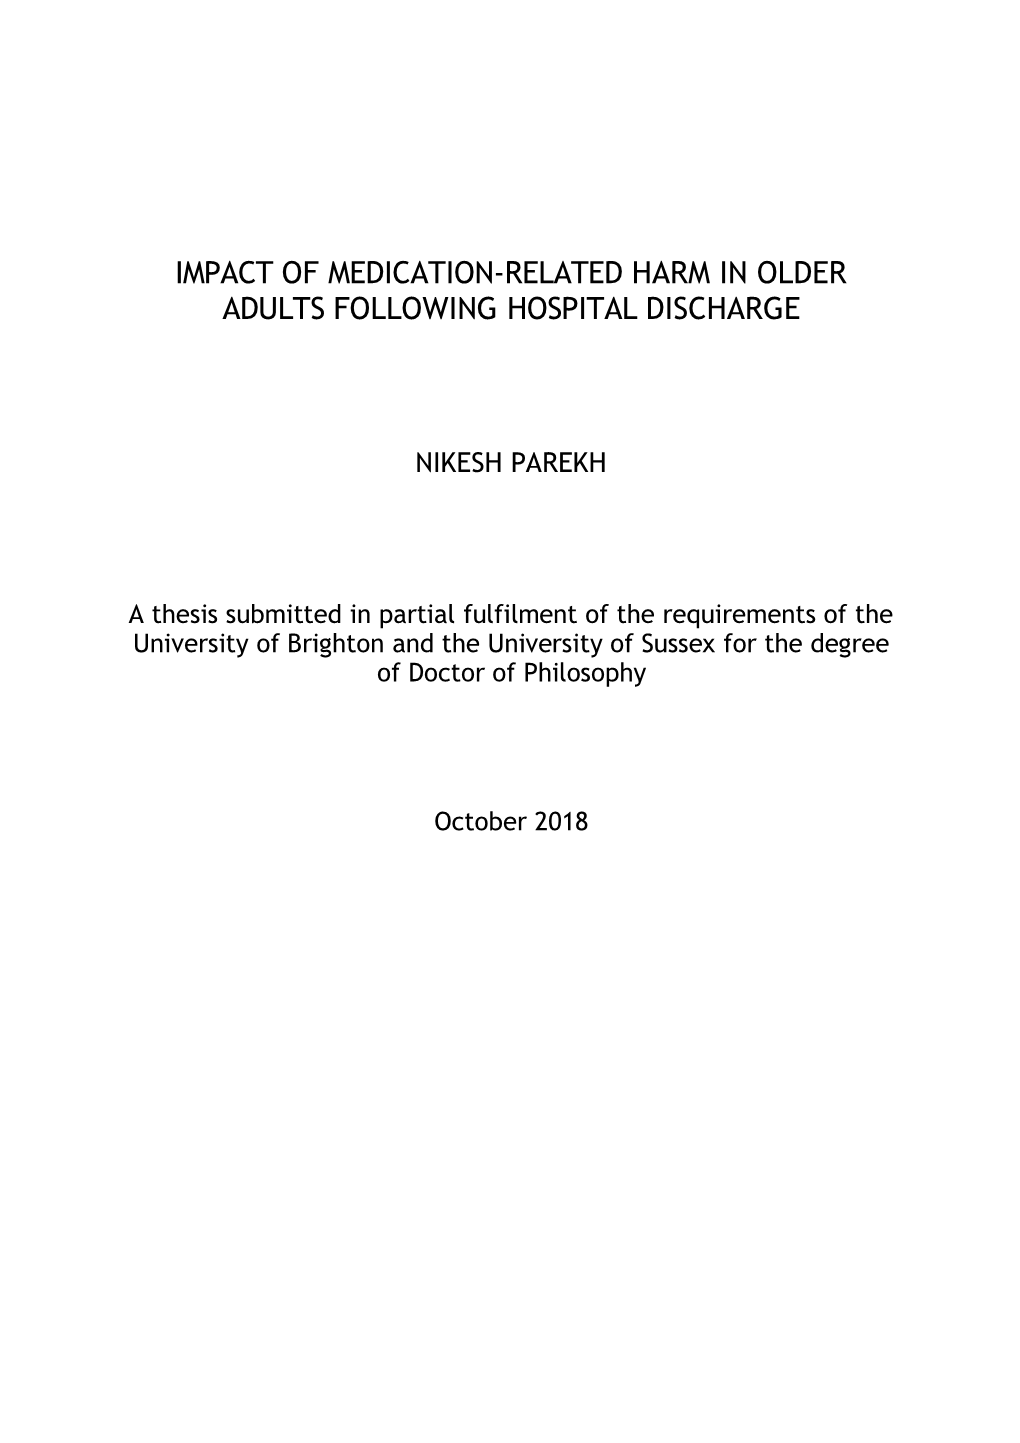 Impact of Medication-Related Harm in Older Adults Following Hospital Discharge